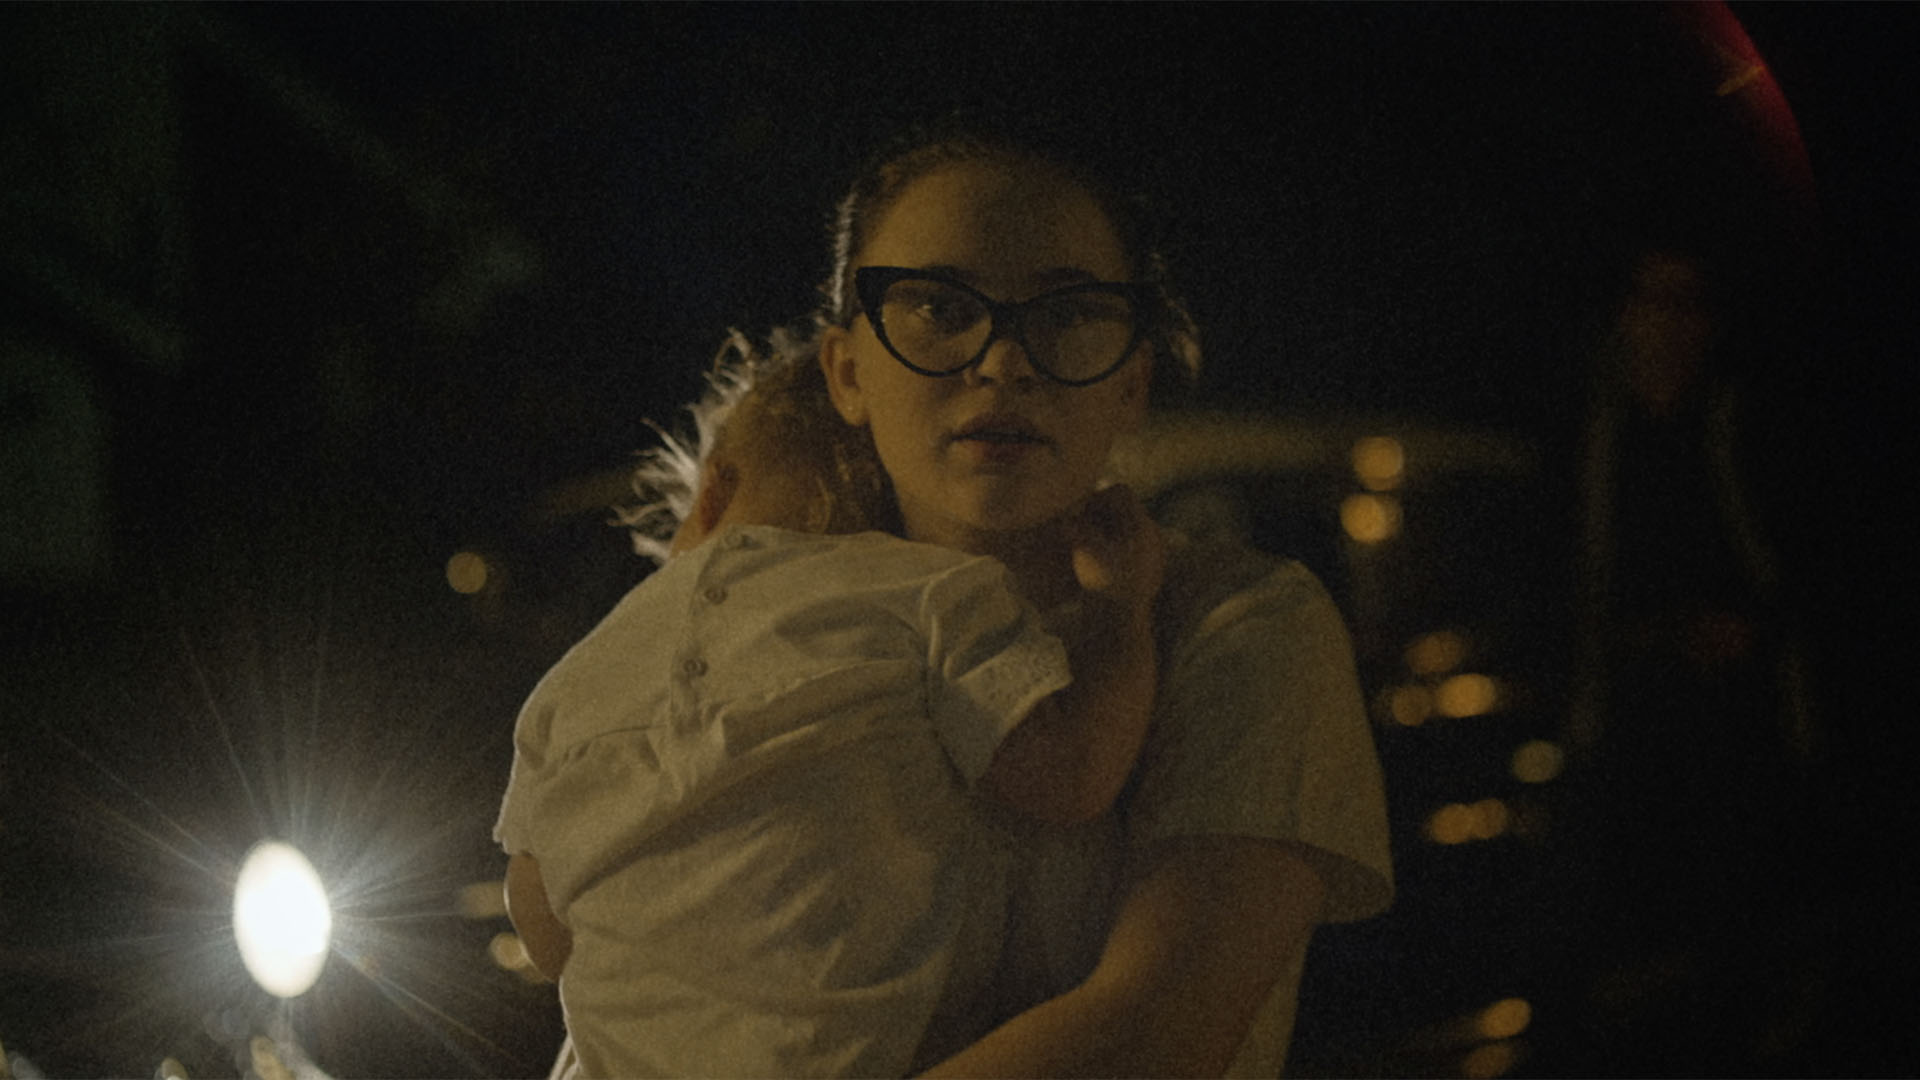 Trailer still frame from The Vast of Night, woman holding child